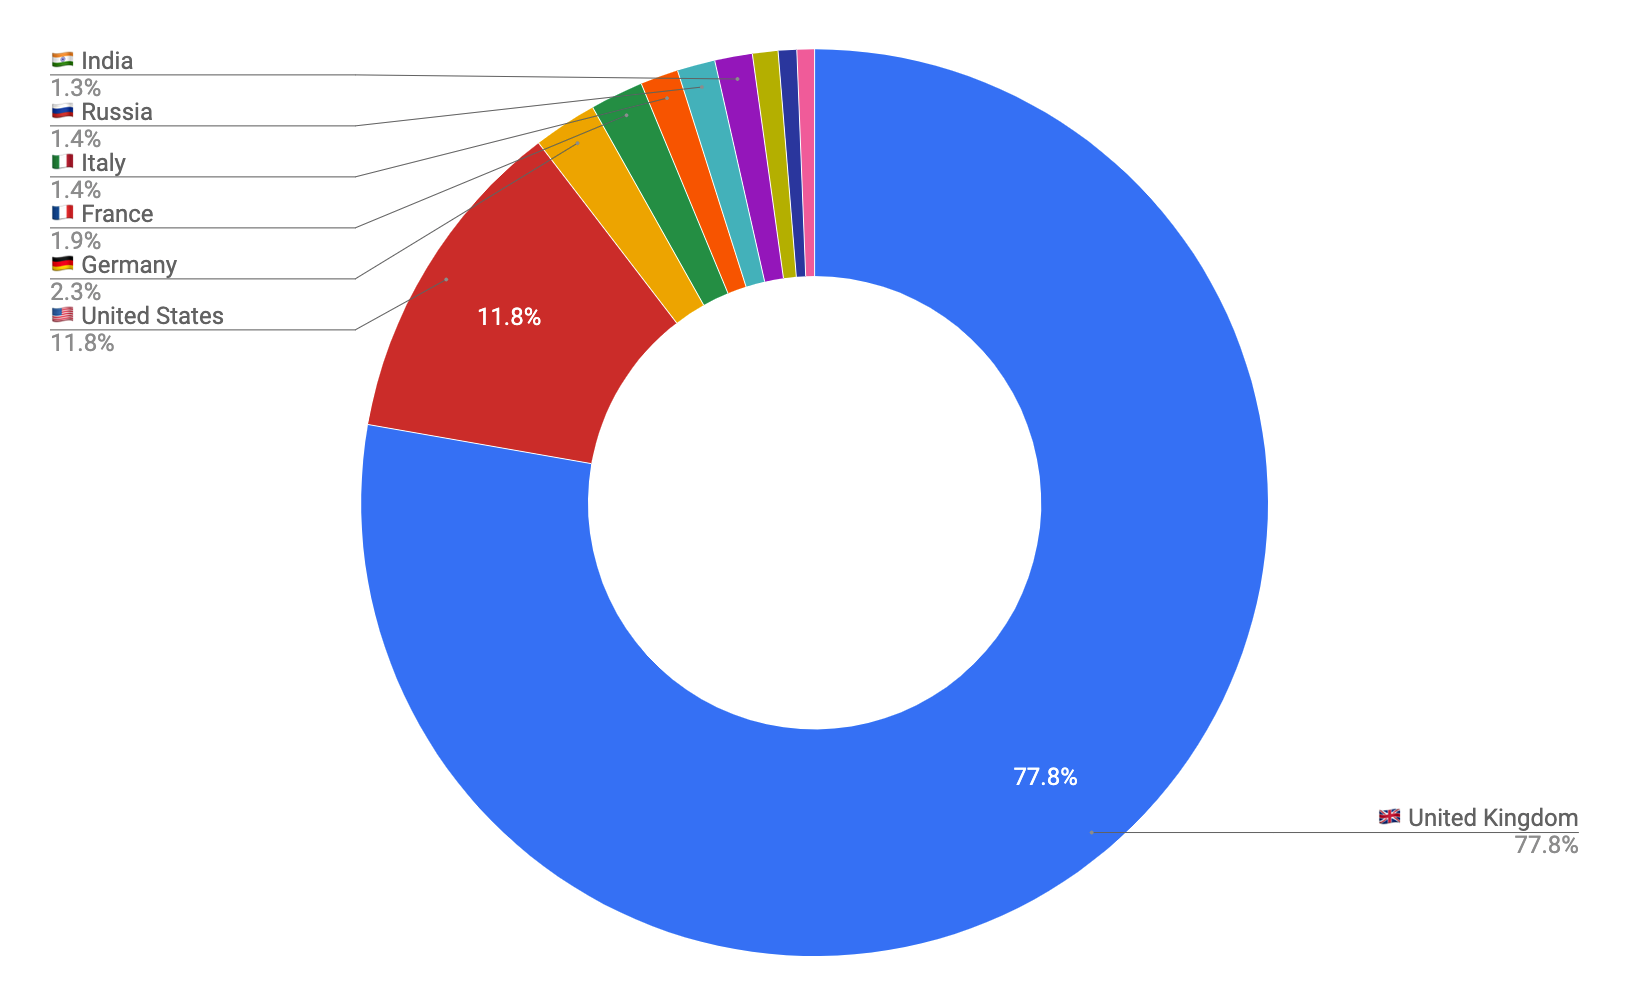 Pie chart showing percentage of unique page views per country